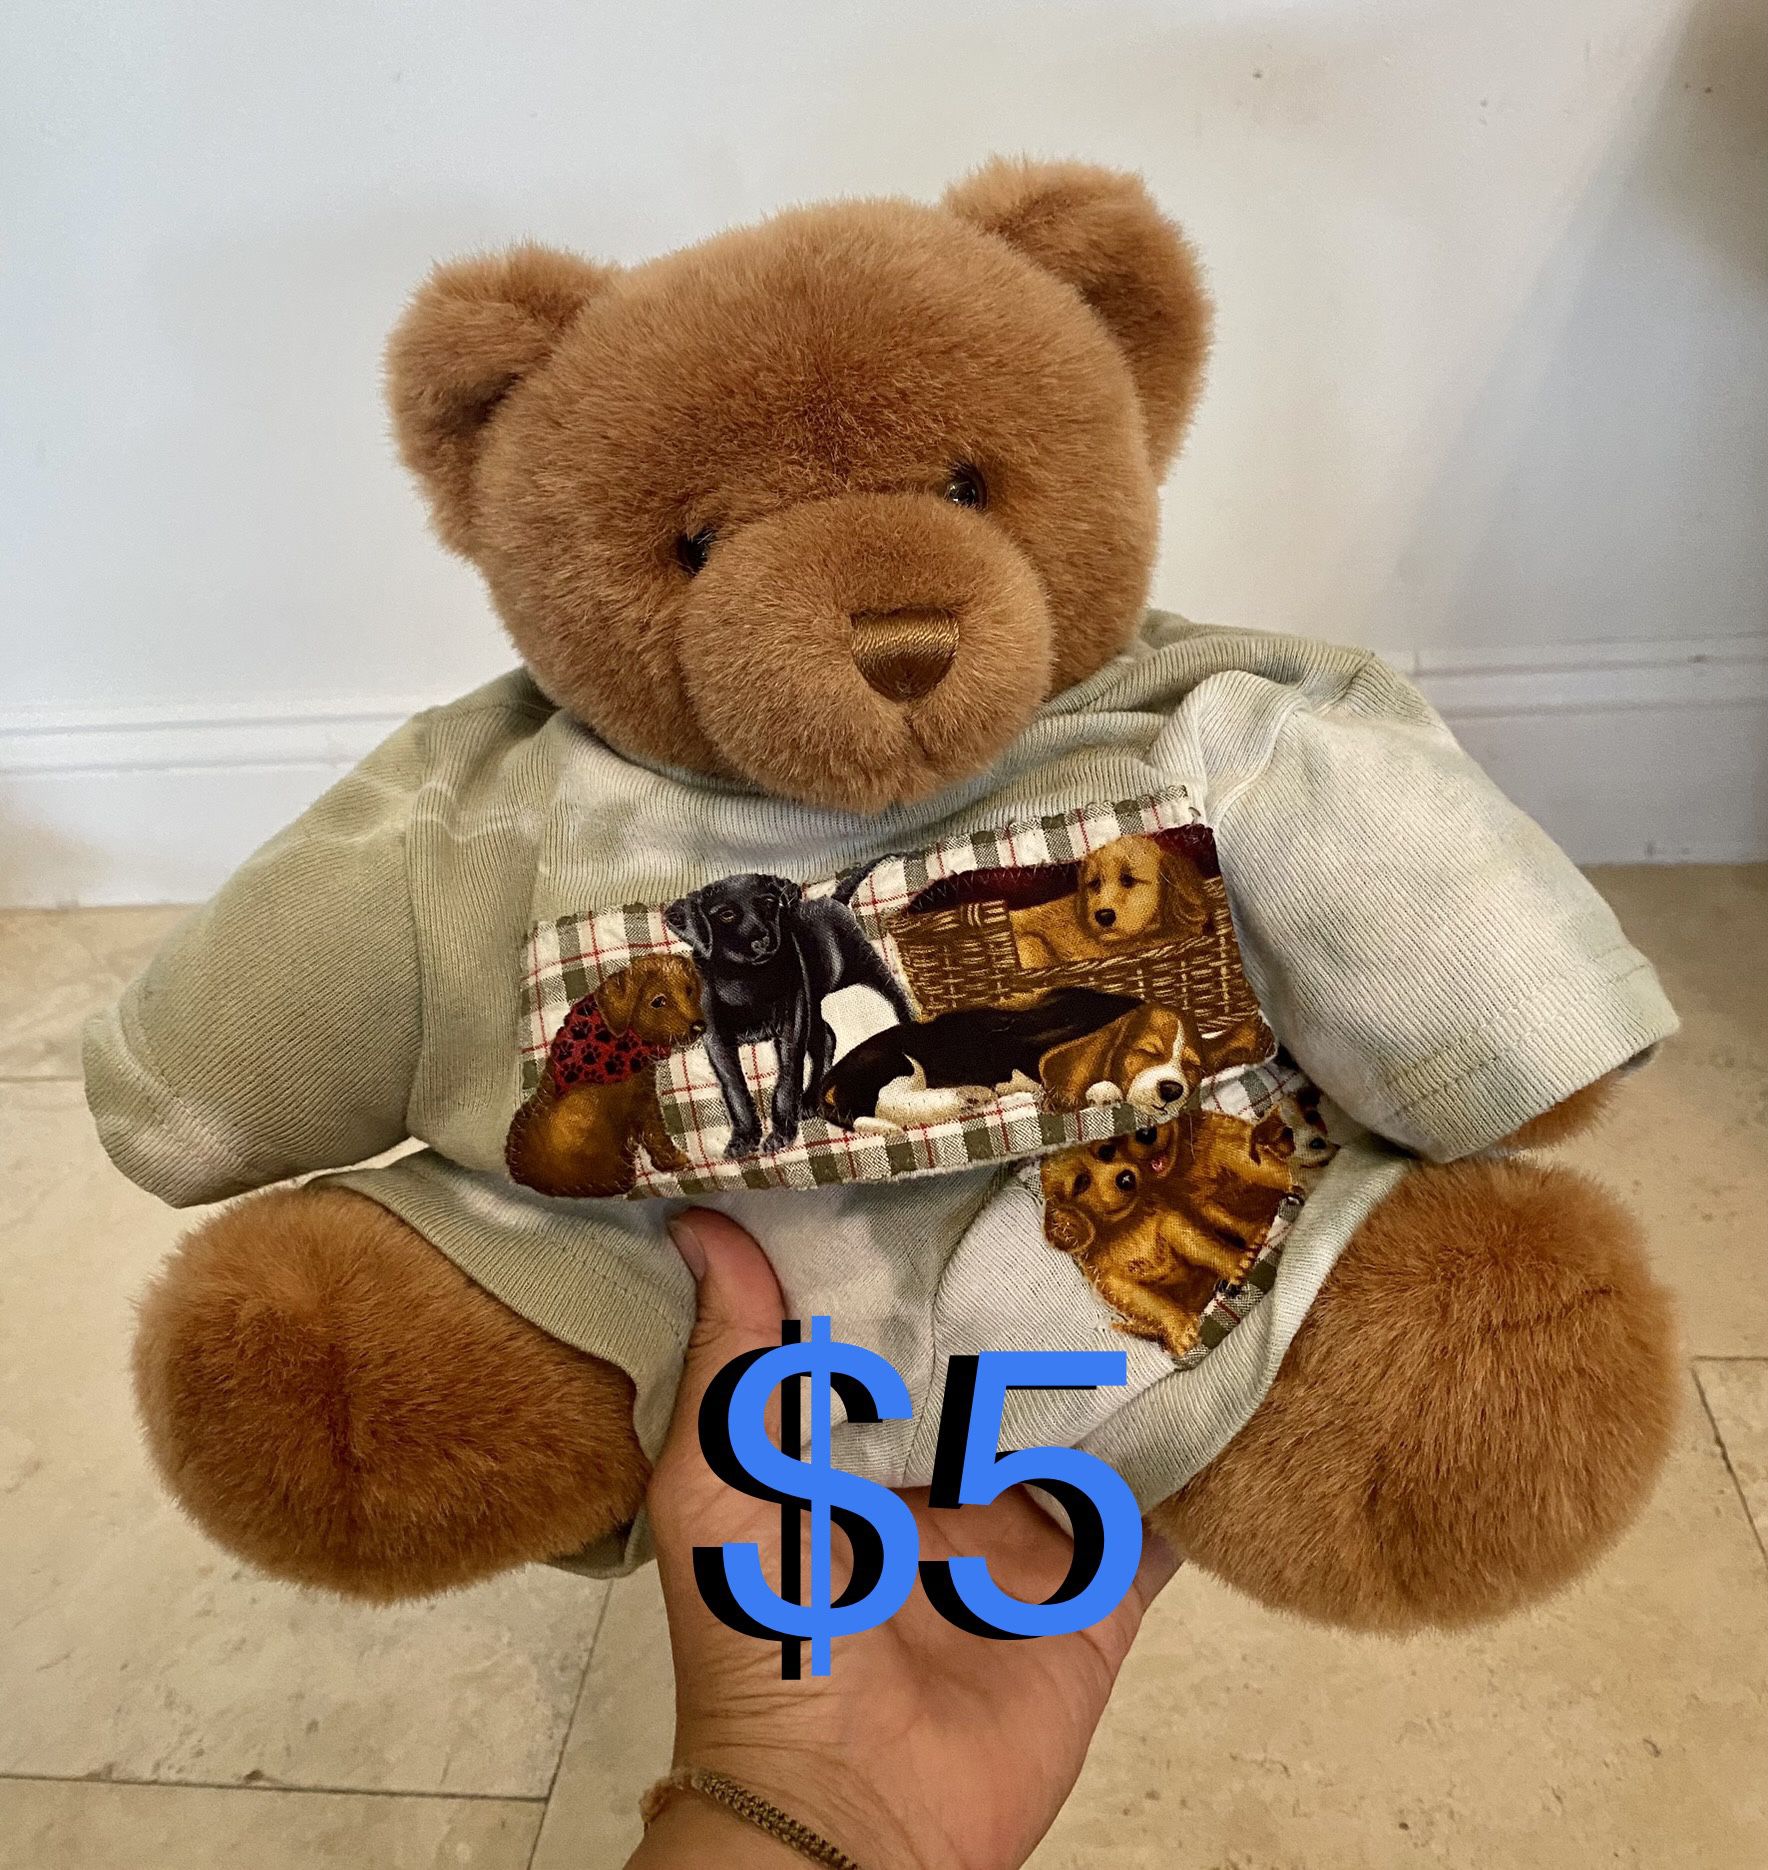 $5 Pawsenclaws & Co. Vintage Teddy Bear Plush with clothes